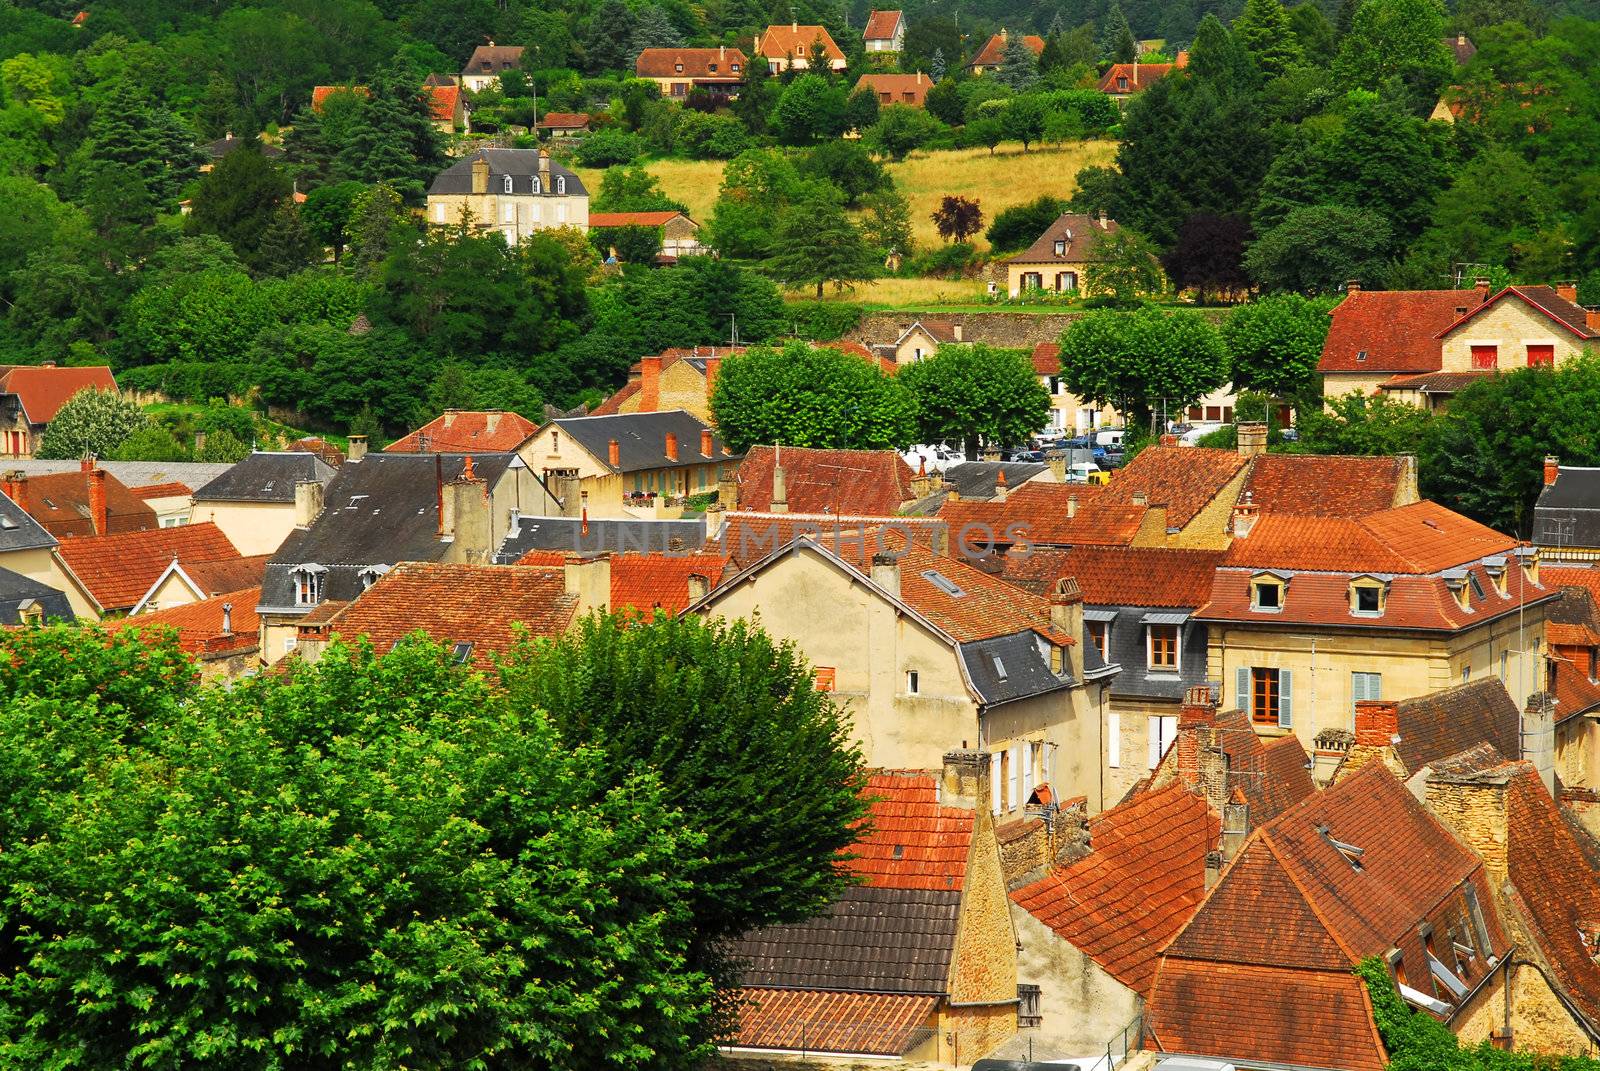 Red rooftops of medieval houses in Sarlat, Dordogne region, France.